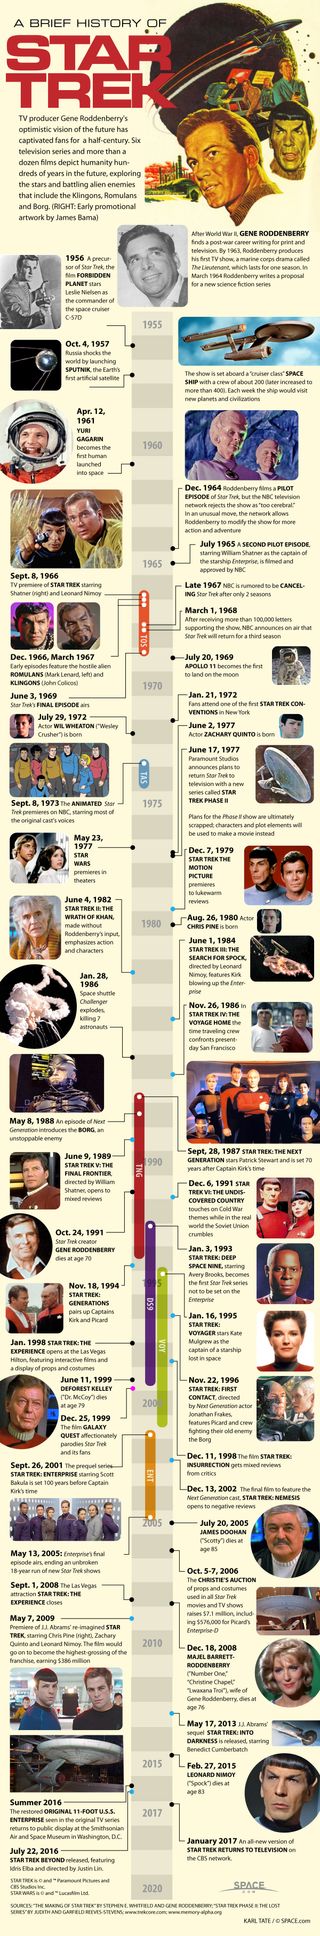 Sept. 8, 2011 marks 45 years since Star Trek first appeared on TV screens.